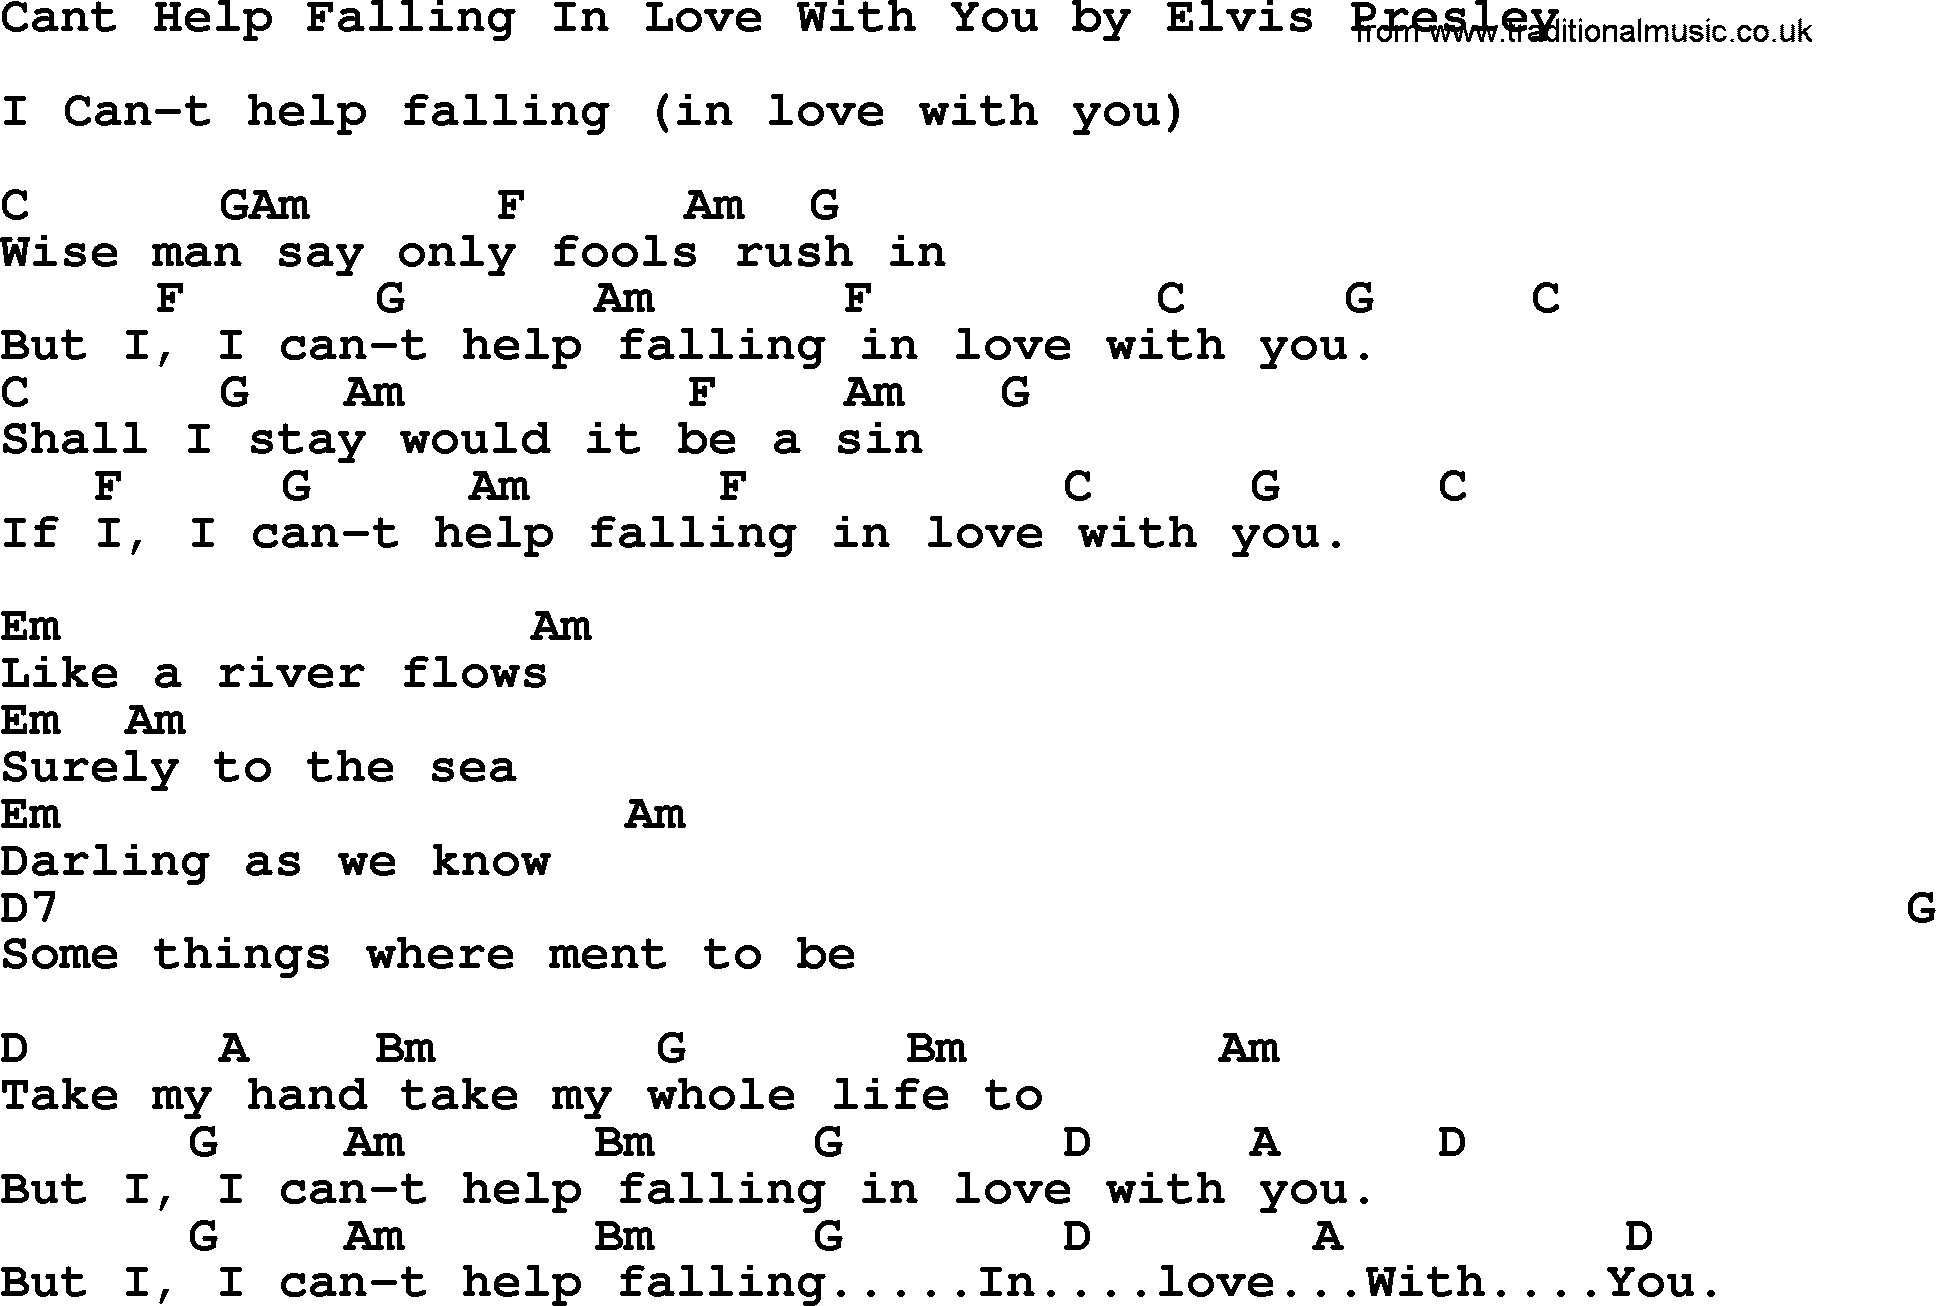 Elvis Presley song: Cant Help Falling In Love With You, lyrics and chords